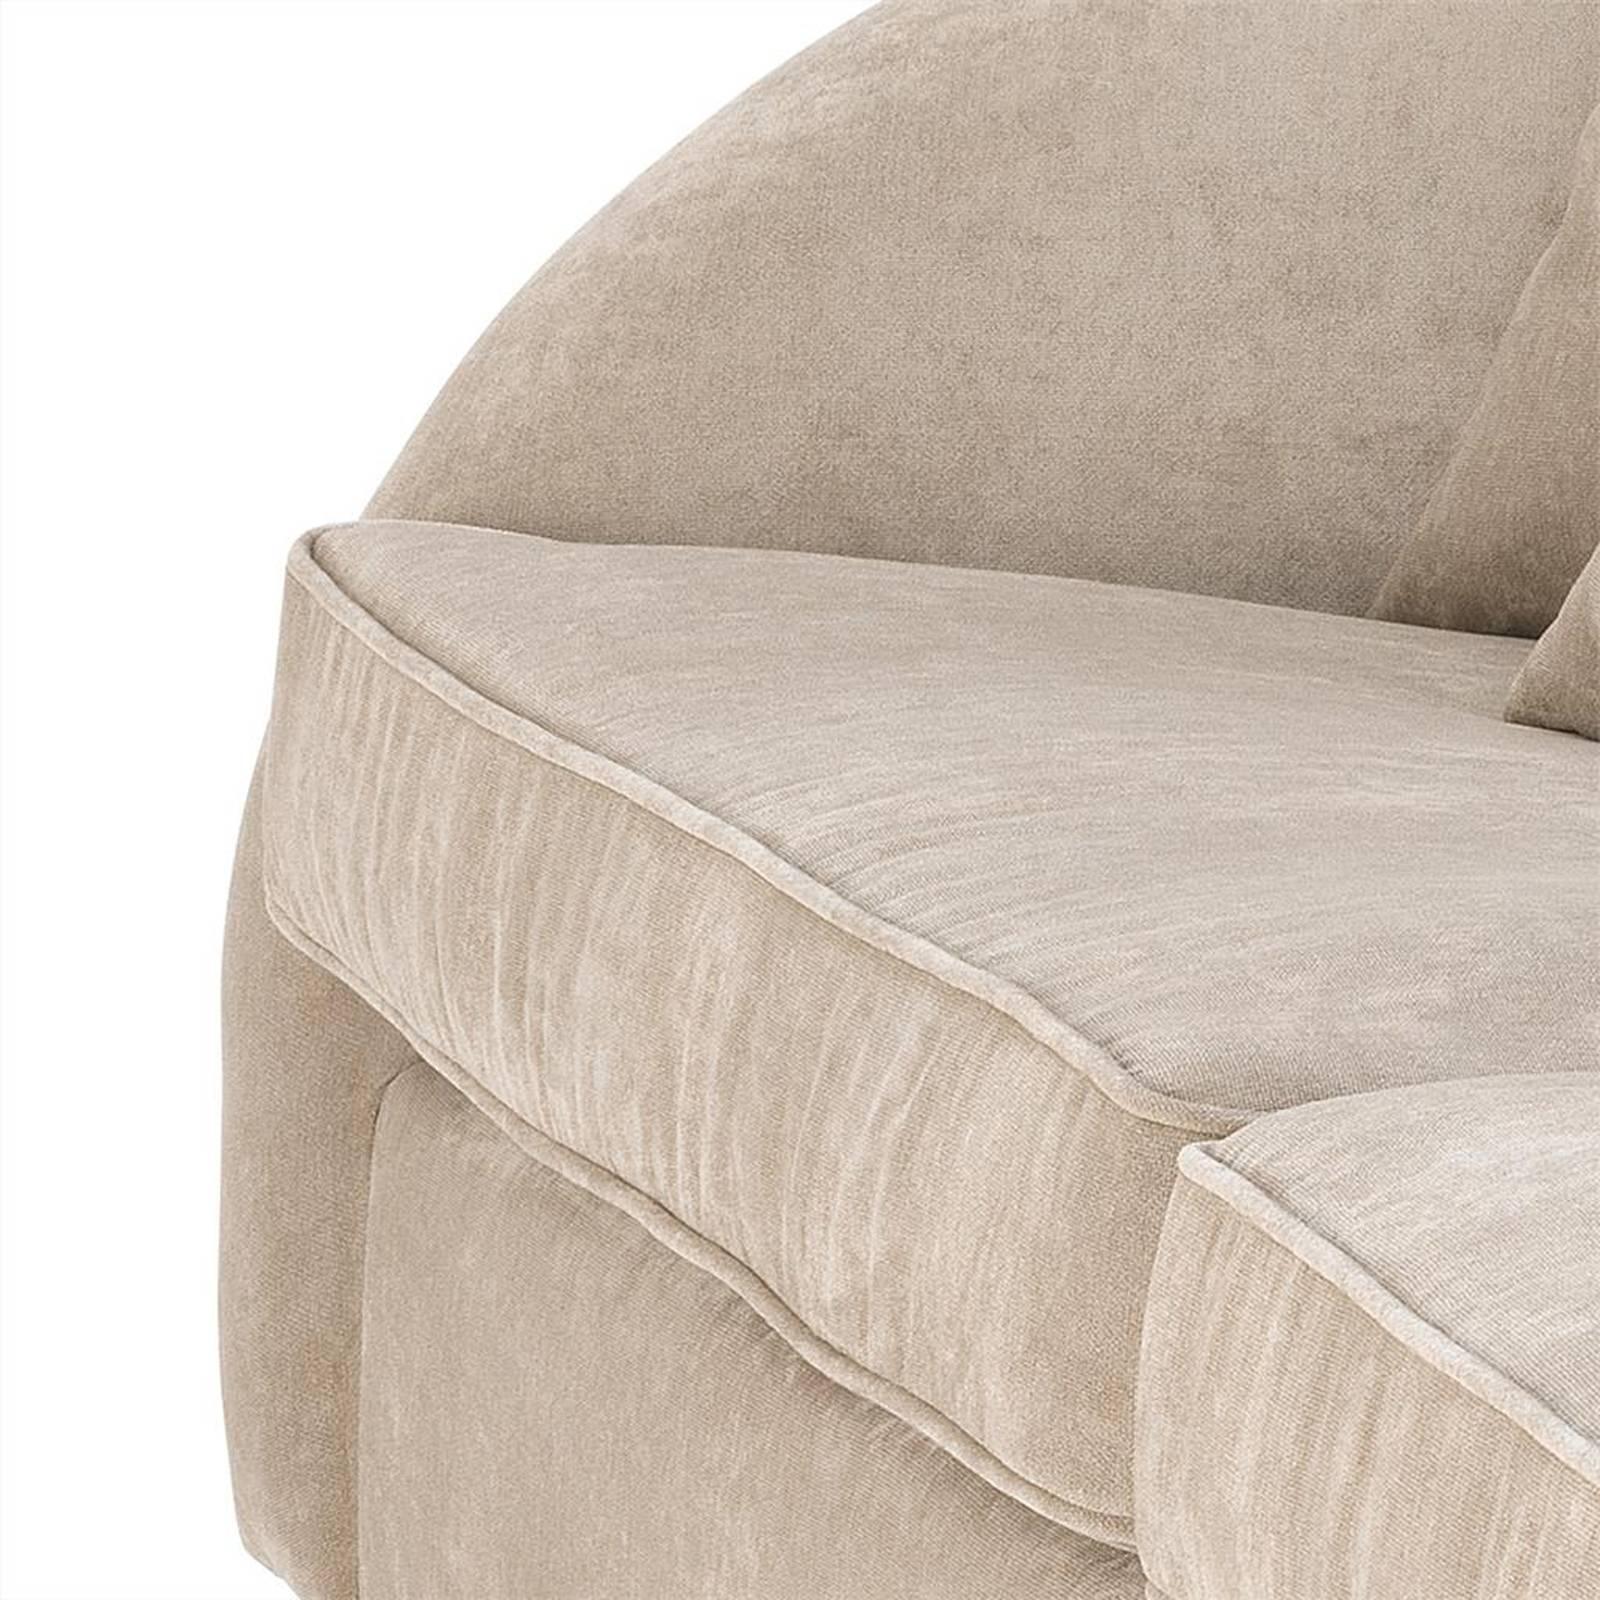 Chinese Miami Lounge Sofa with Greige Velvet Fabric